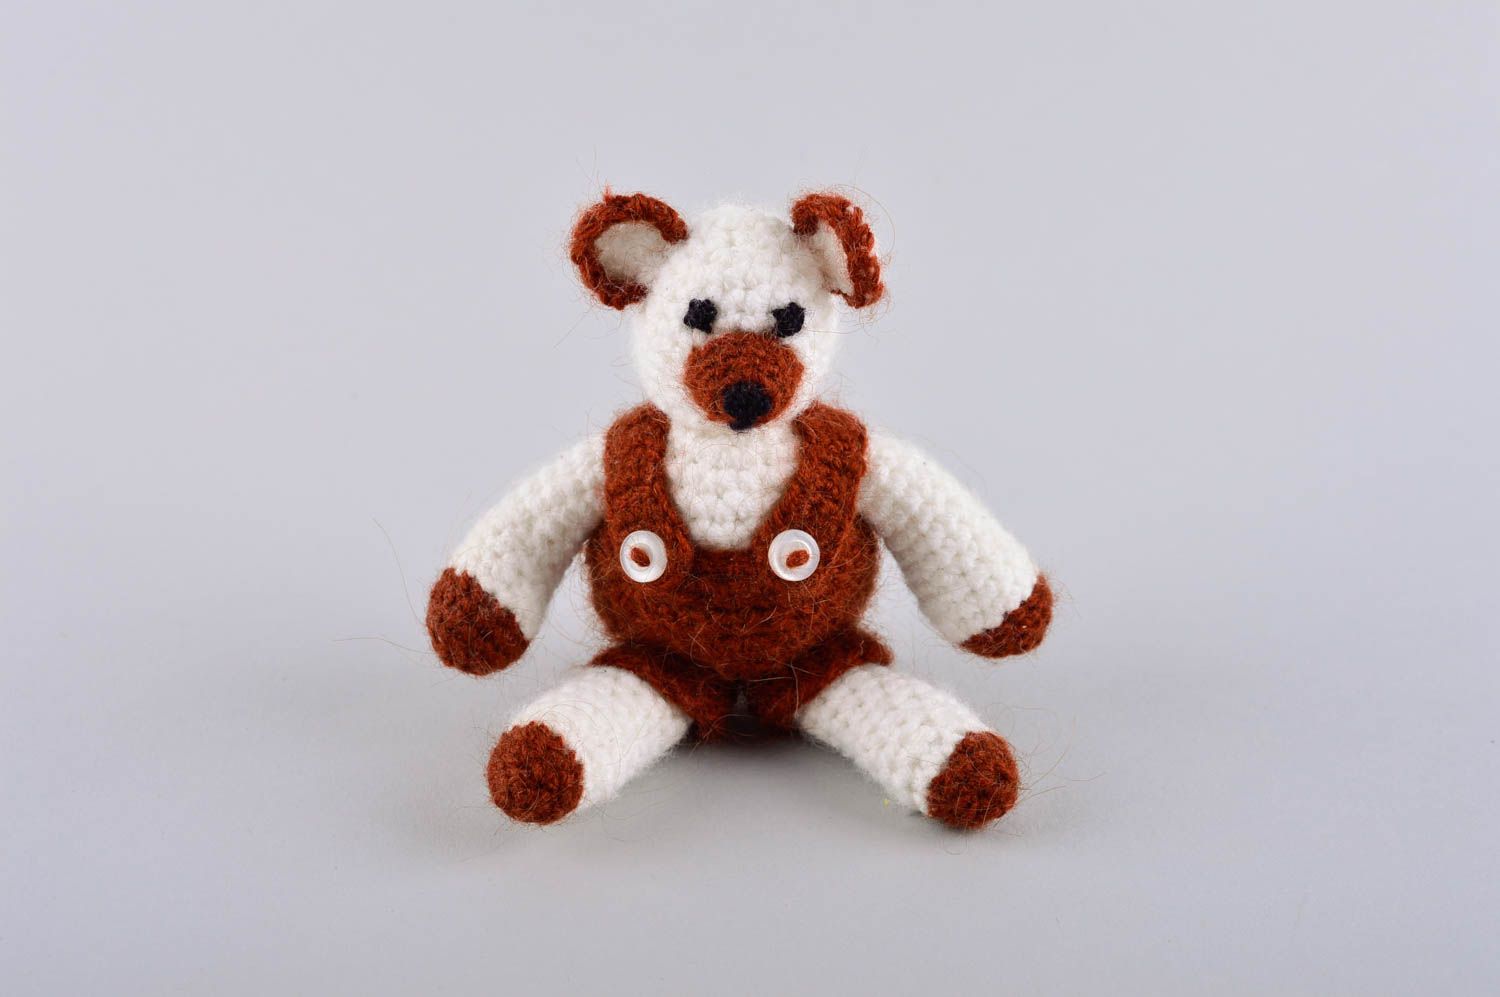 Crochet toy decorative stuffed toy handmade soft toy for children home decor photo 2